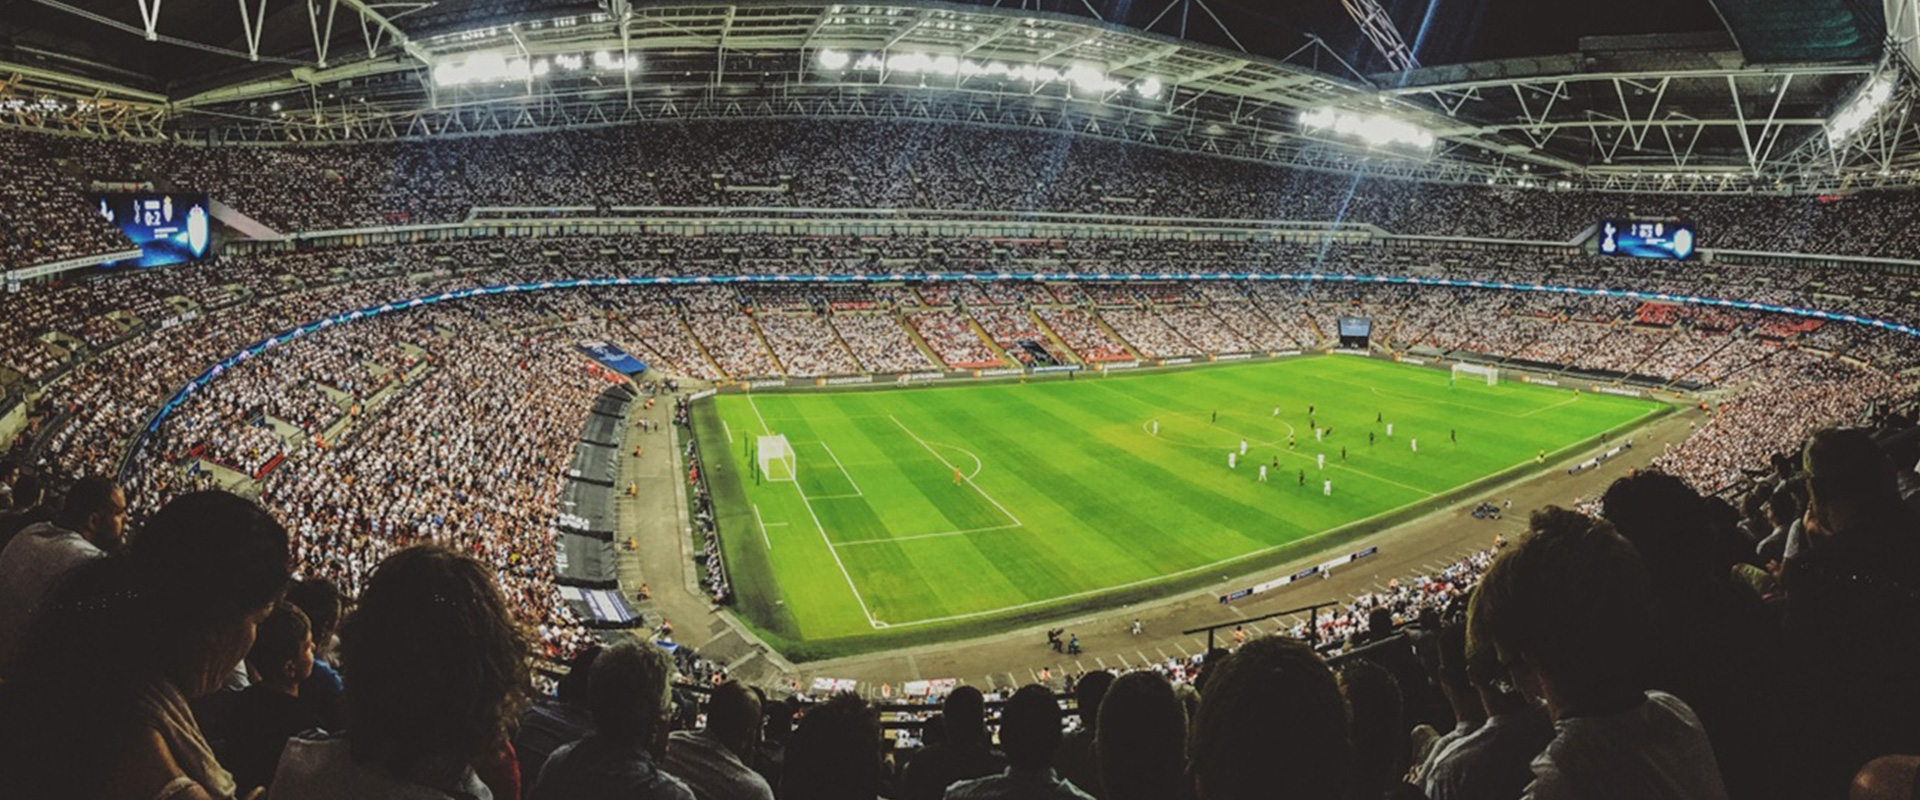 Major sporting tournament generates an ROI of 677% on ticket sales |  Sparcmedia